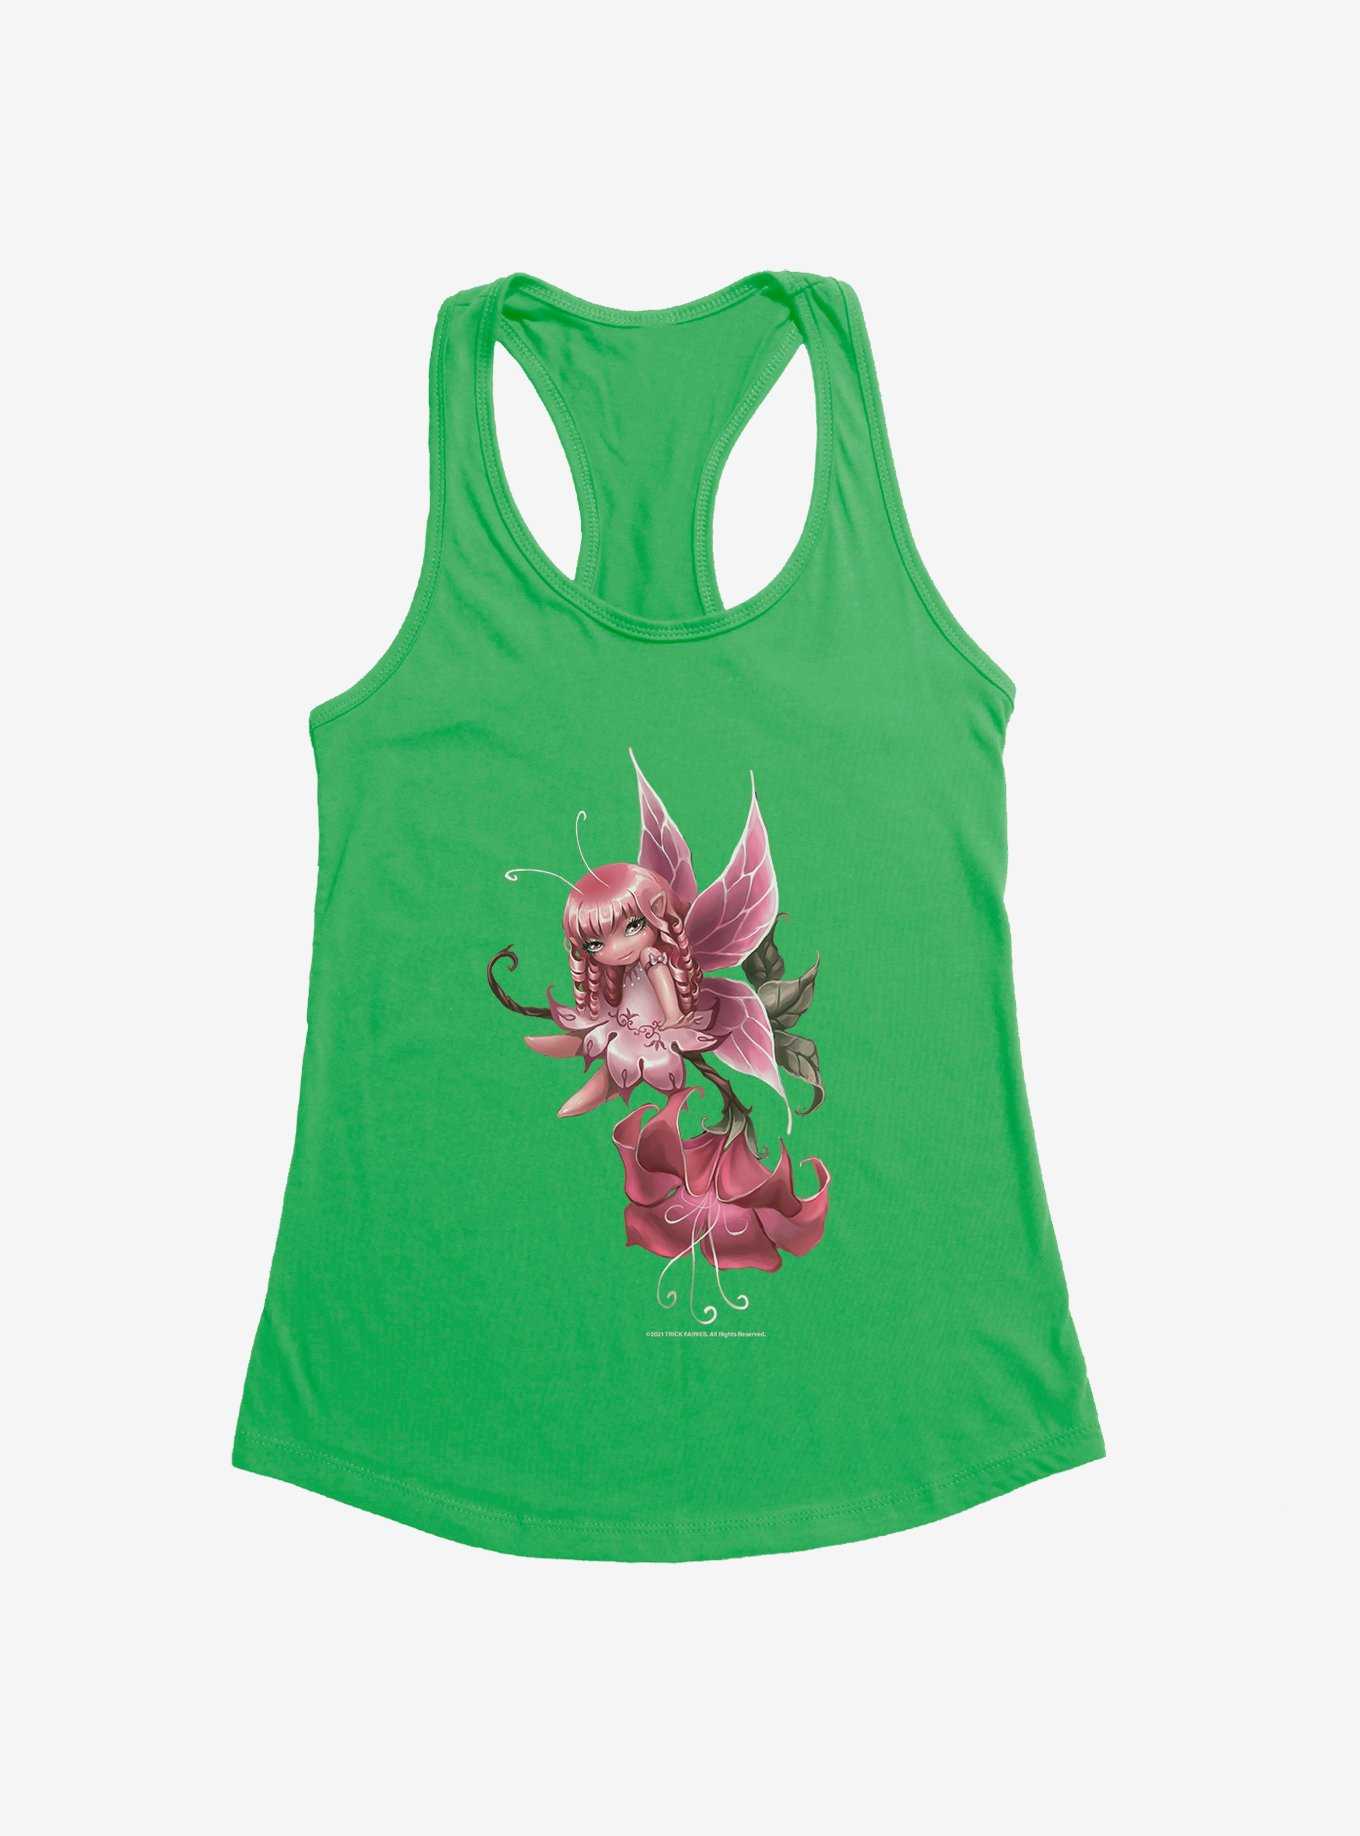 Fairies By Trick Pink Fairy Girls Tank, , hi-res